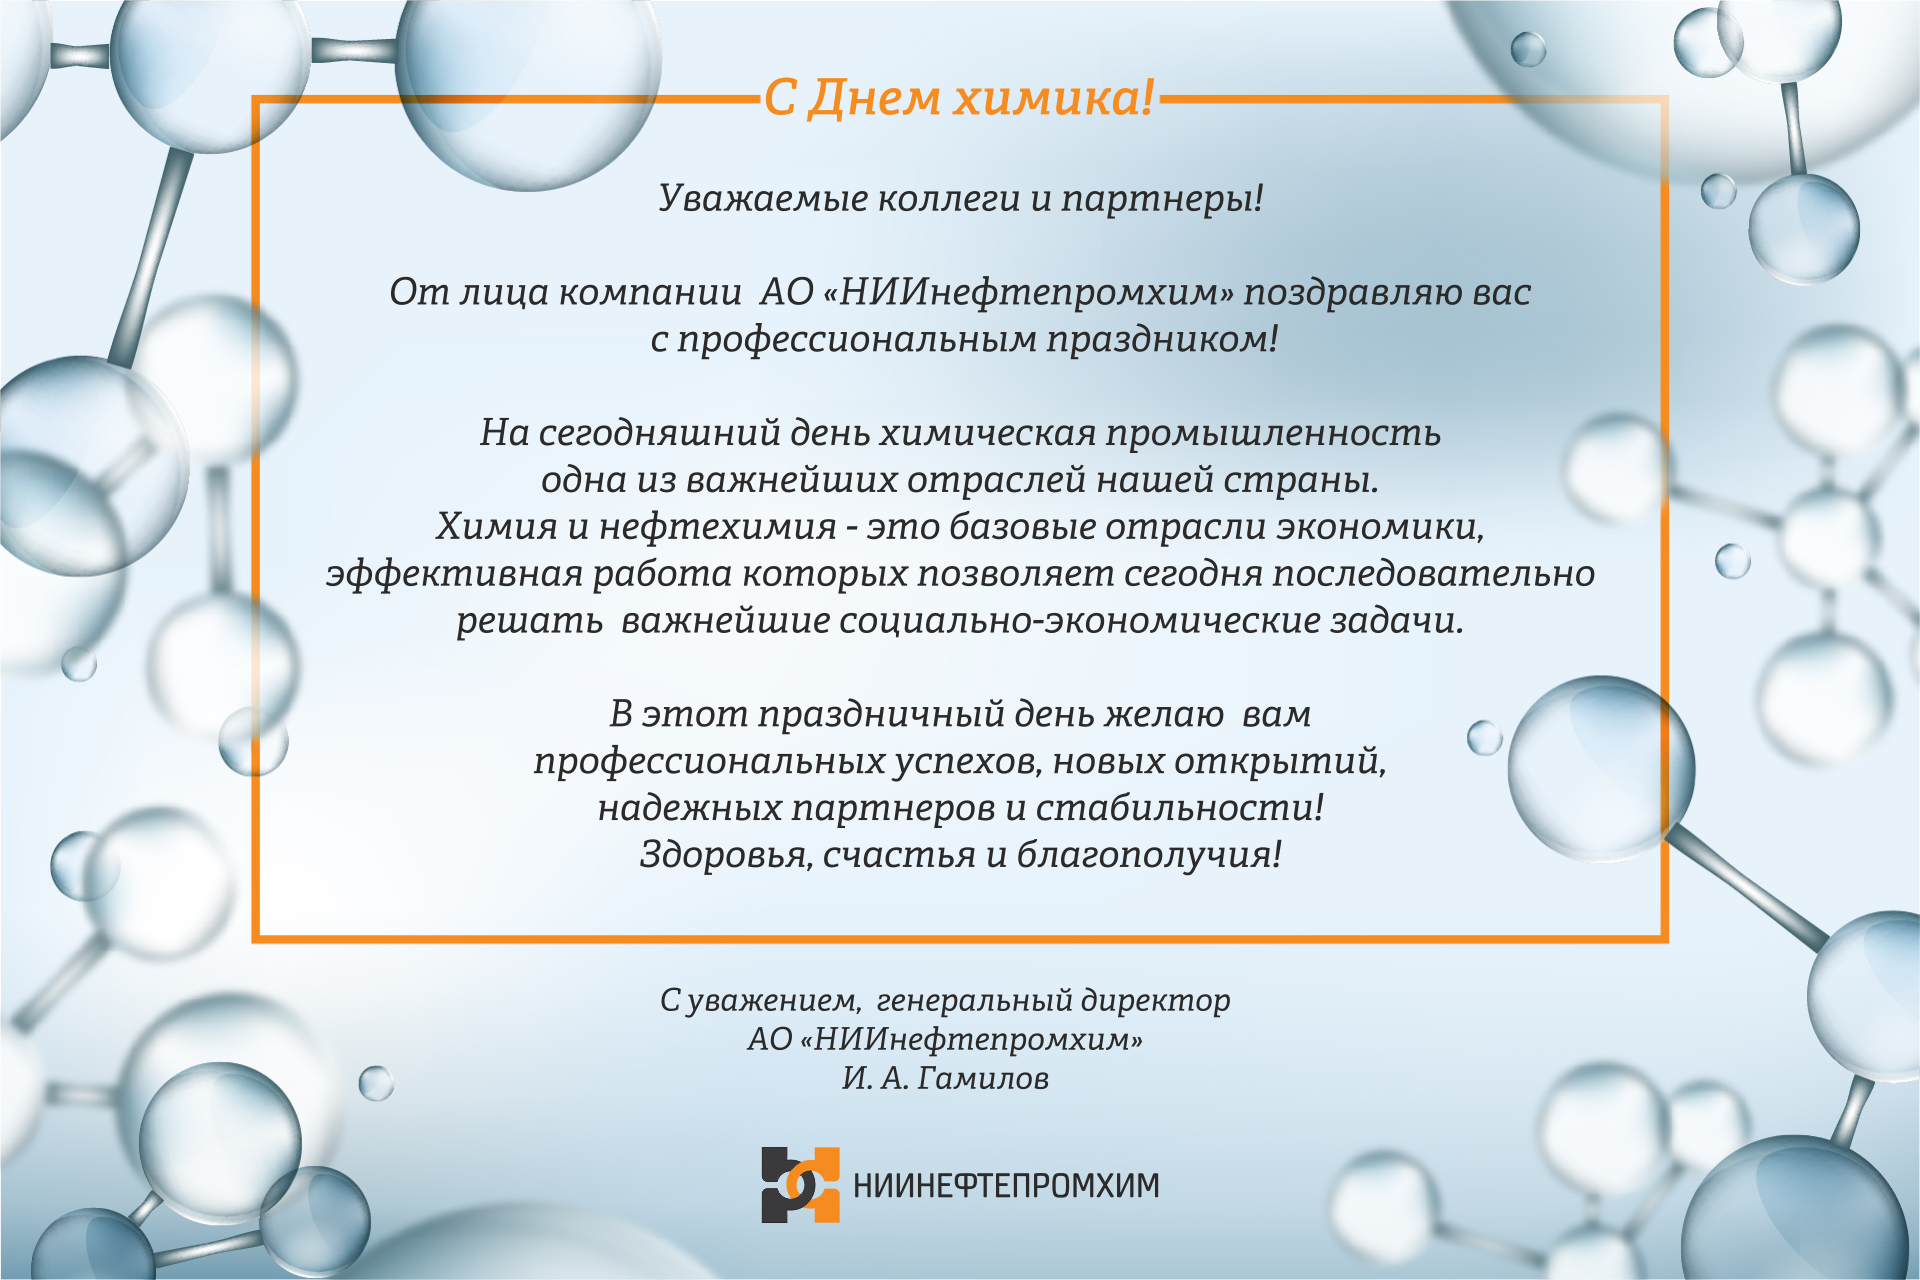 Please accept our congratulations on your professional holiday – CHEMIST'S DAY!